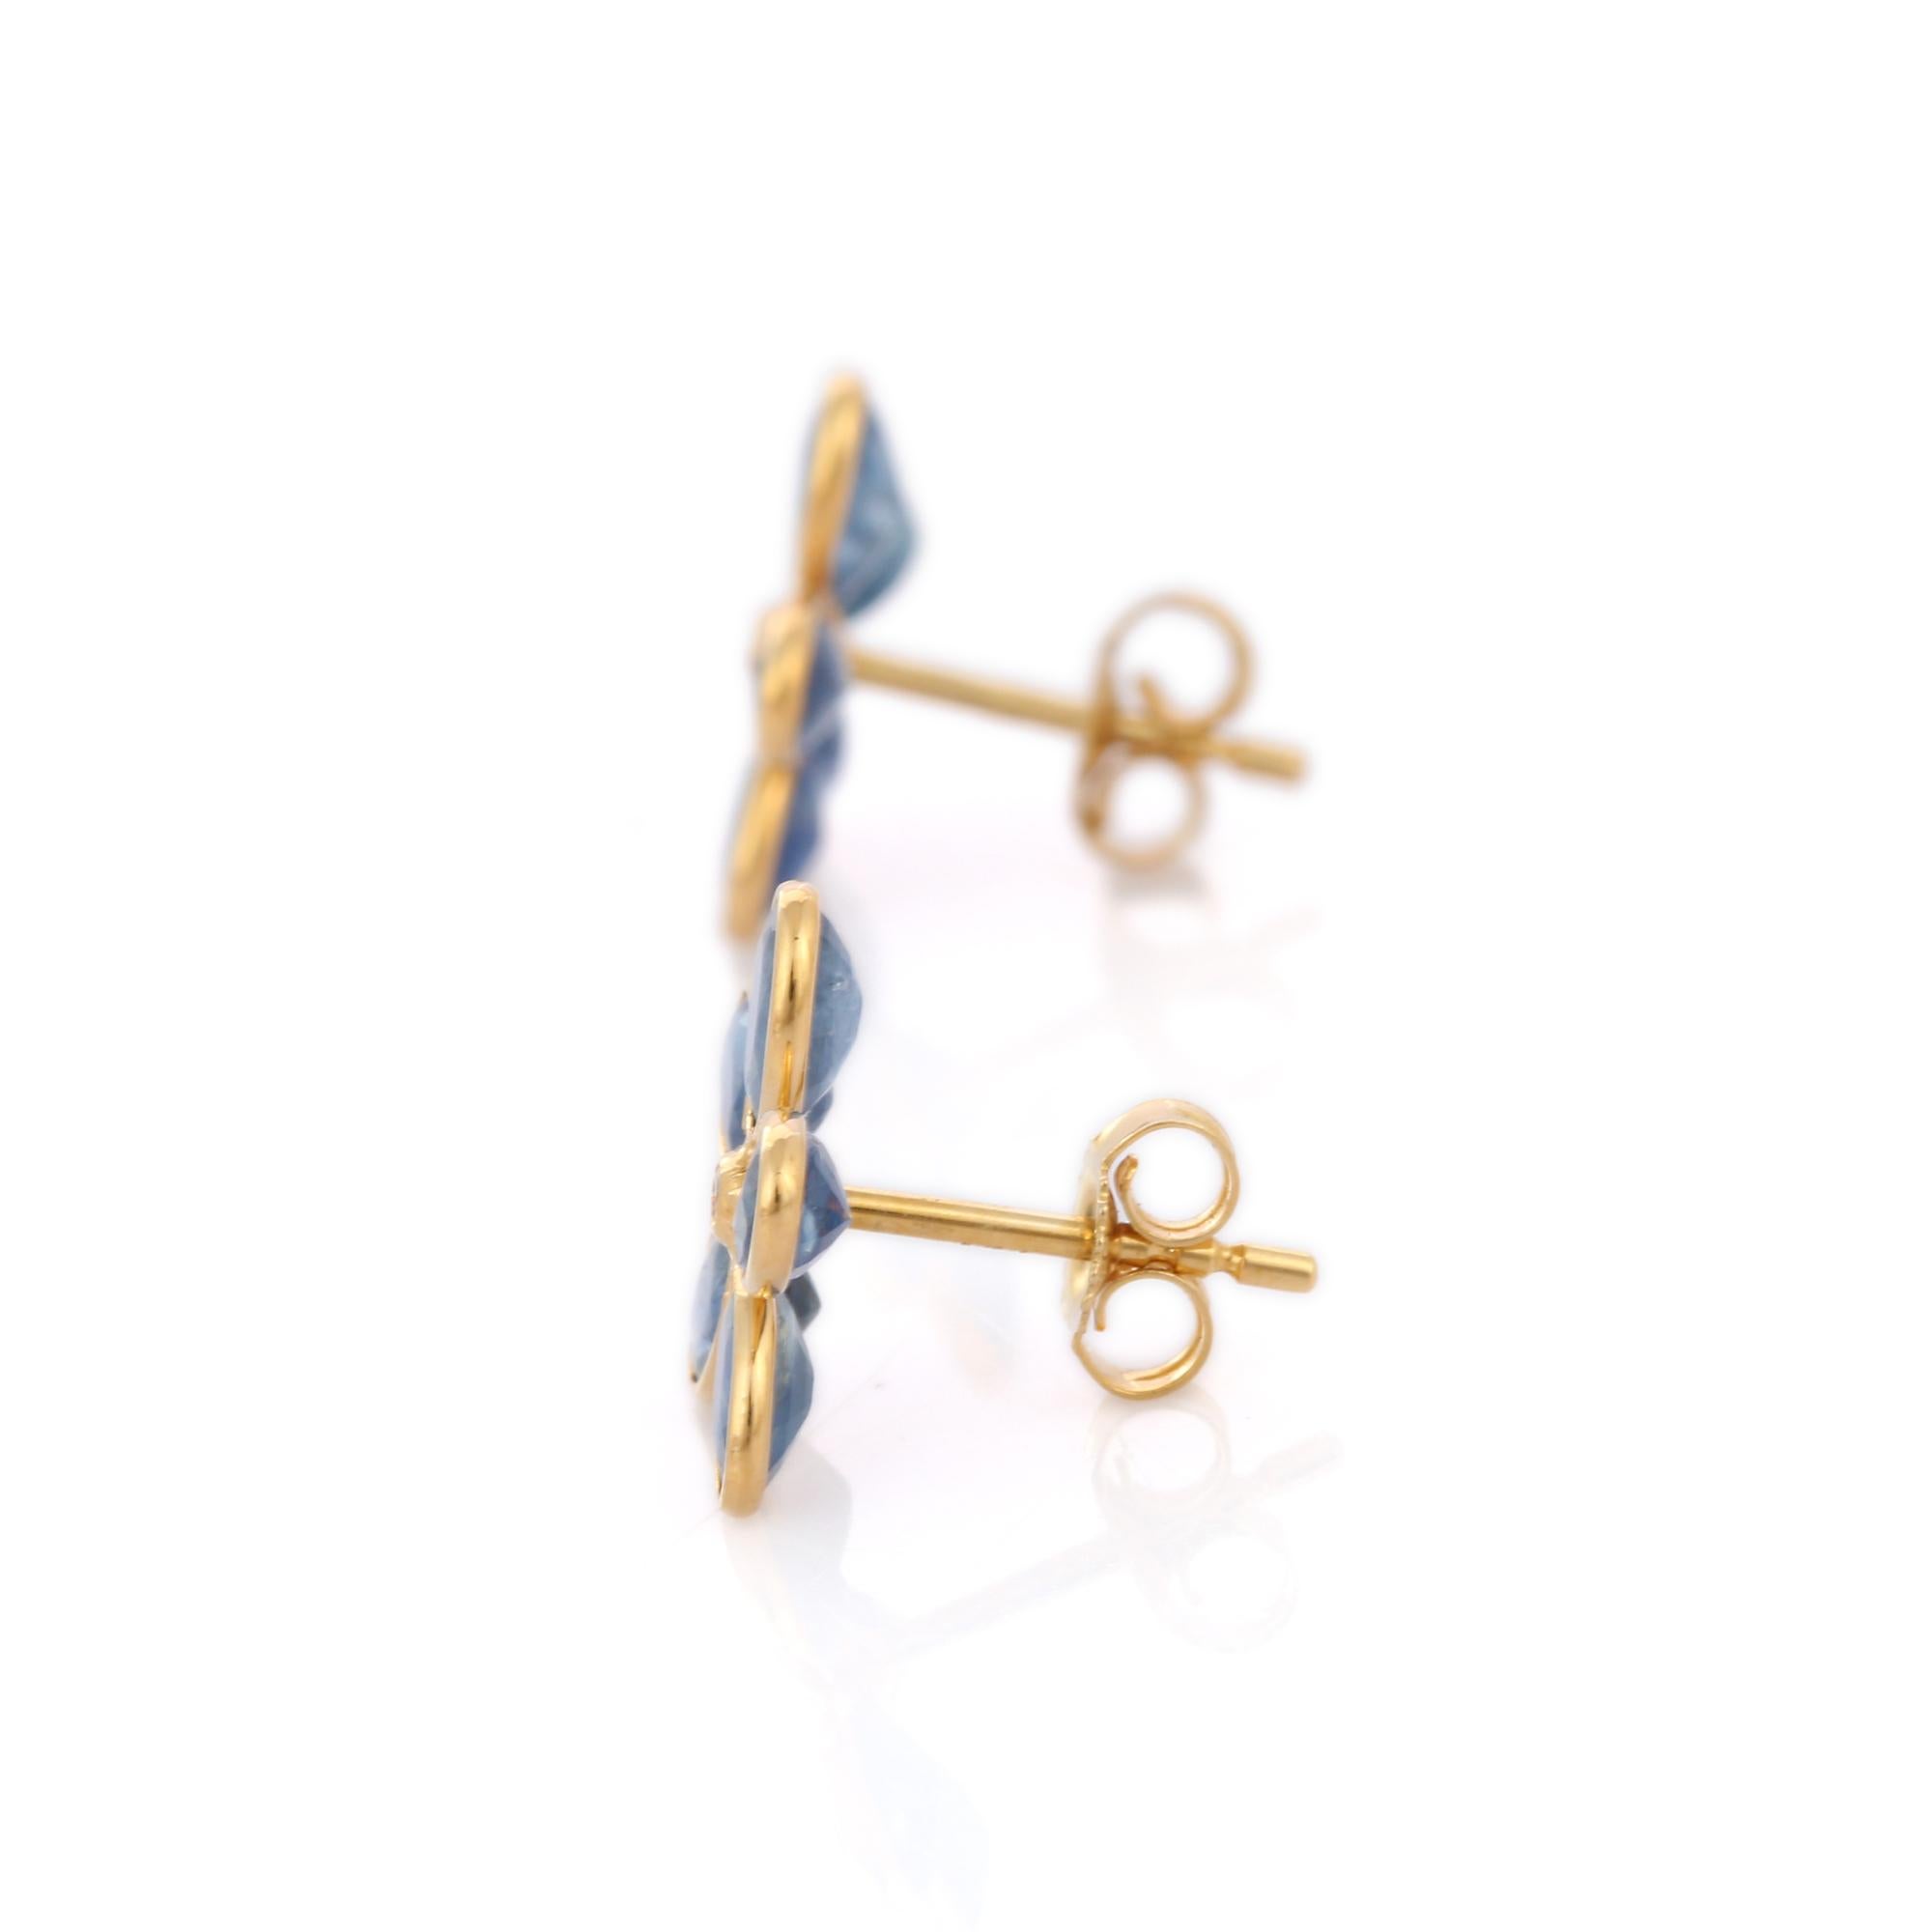 Floral 3.5 ct Blue Sapphire and Diamond Stud Earrings in 18K Yellow Gold In New Condition For Sale In Houston, TX